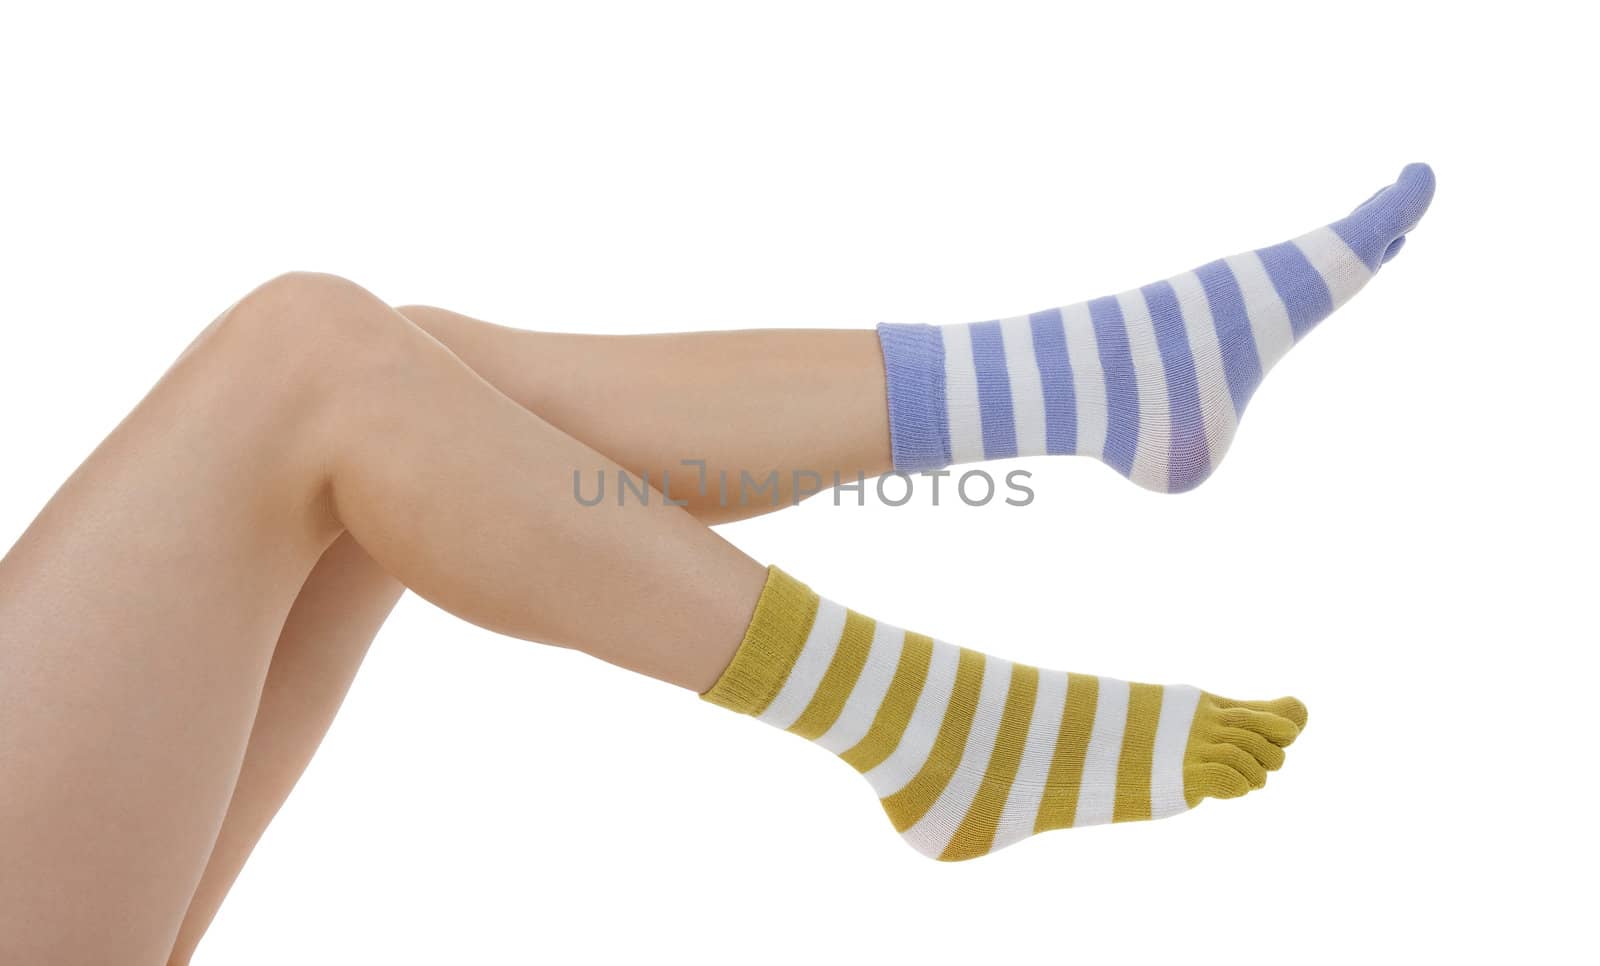 Sexy female legs in socks of different colors on white background.